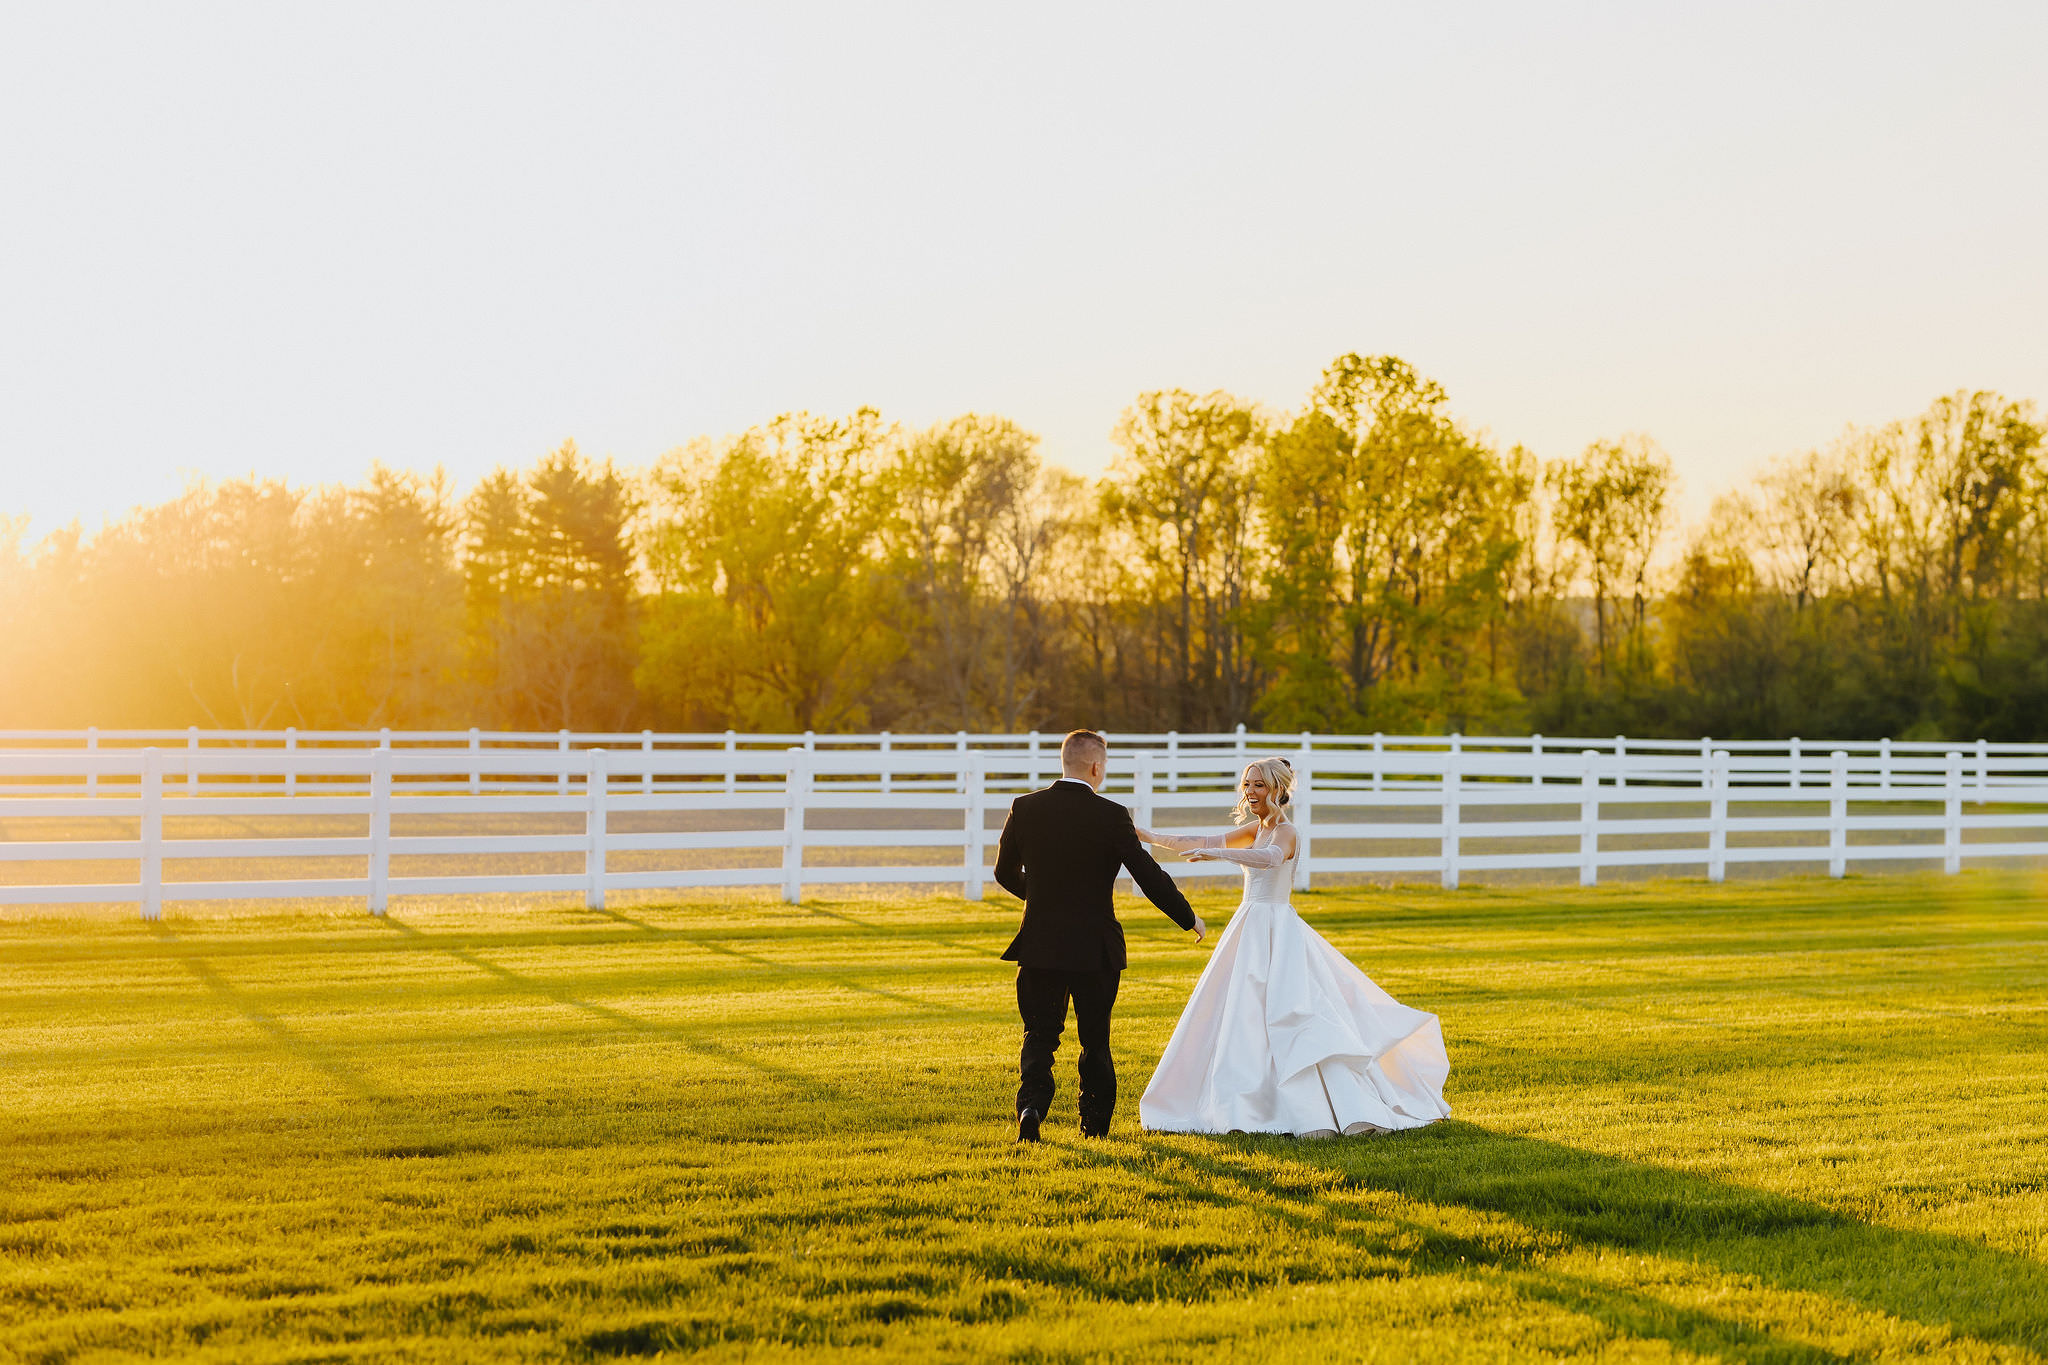 Documentary style wedding photography showing a couple holding hands and walking in a field.